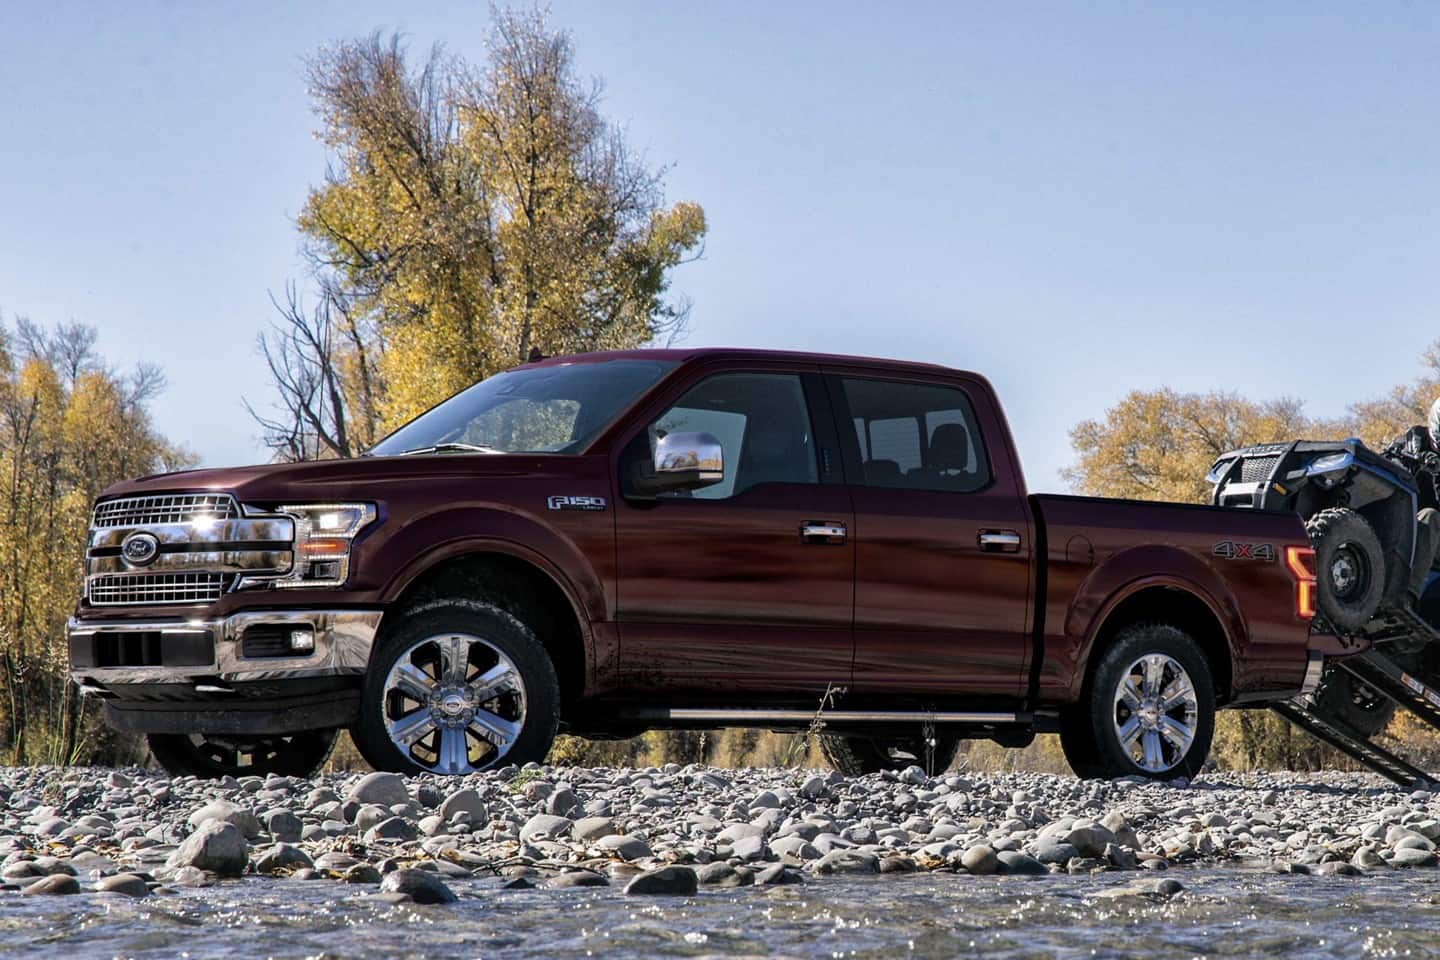 2019 Ford F-150 for Sale near Fort Rucker, AL